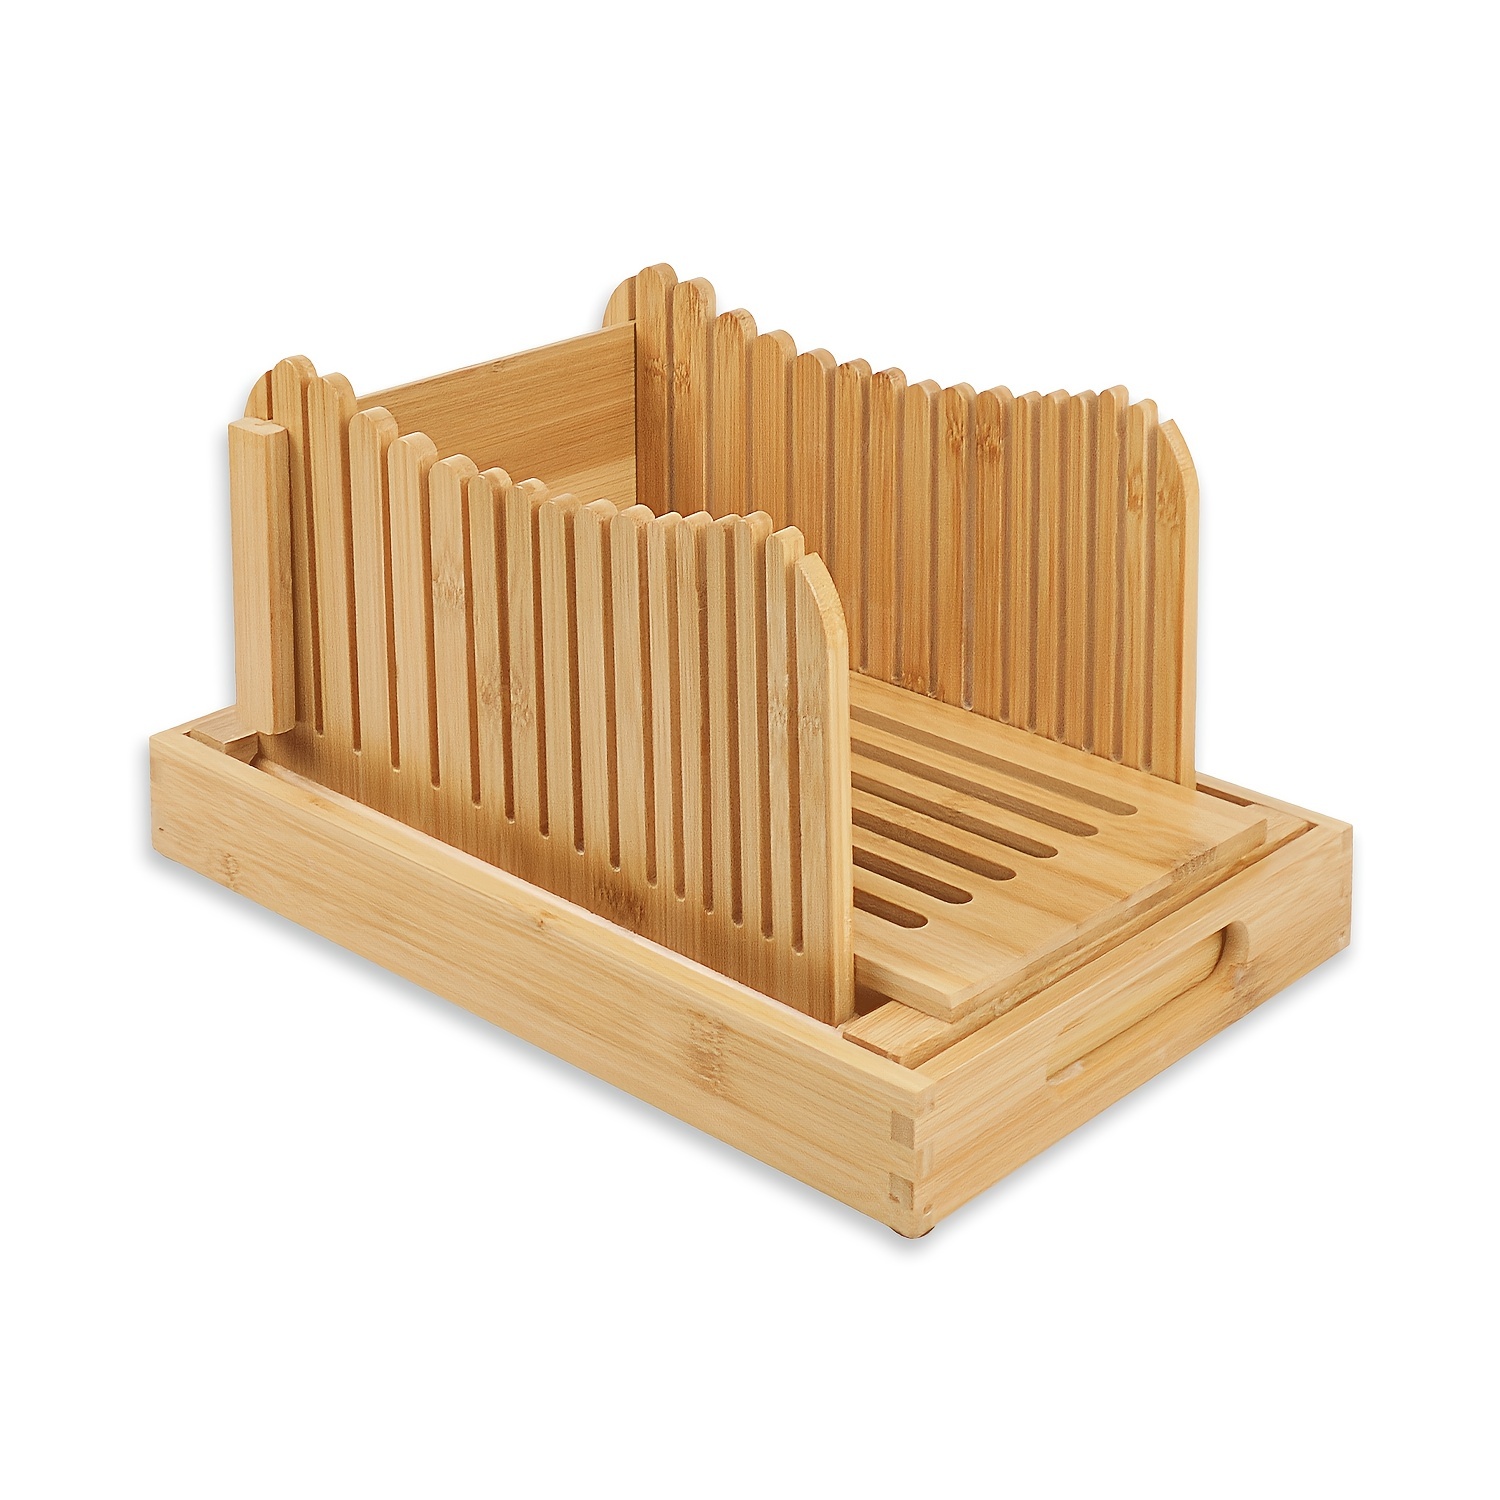 Bamboo Bread Slicer Fold-able Wooden Bread Slicer with 3 Slicer Sizes  Adjustable Slicing Guide for Homemade Bread Cakes Bagels